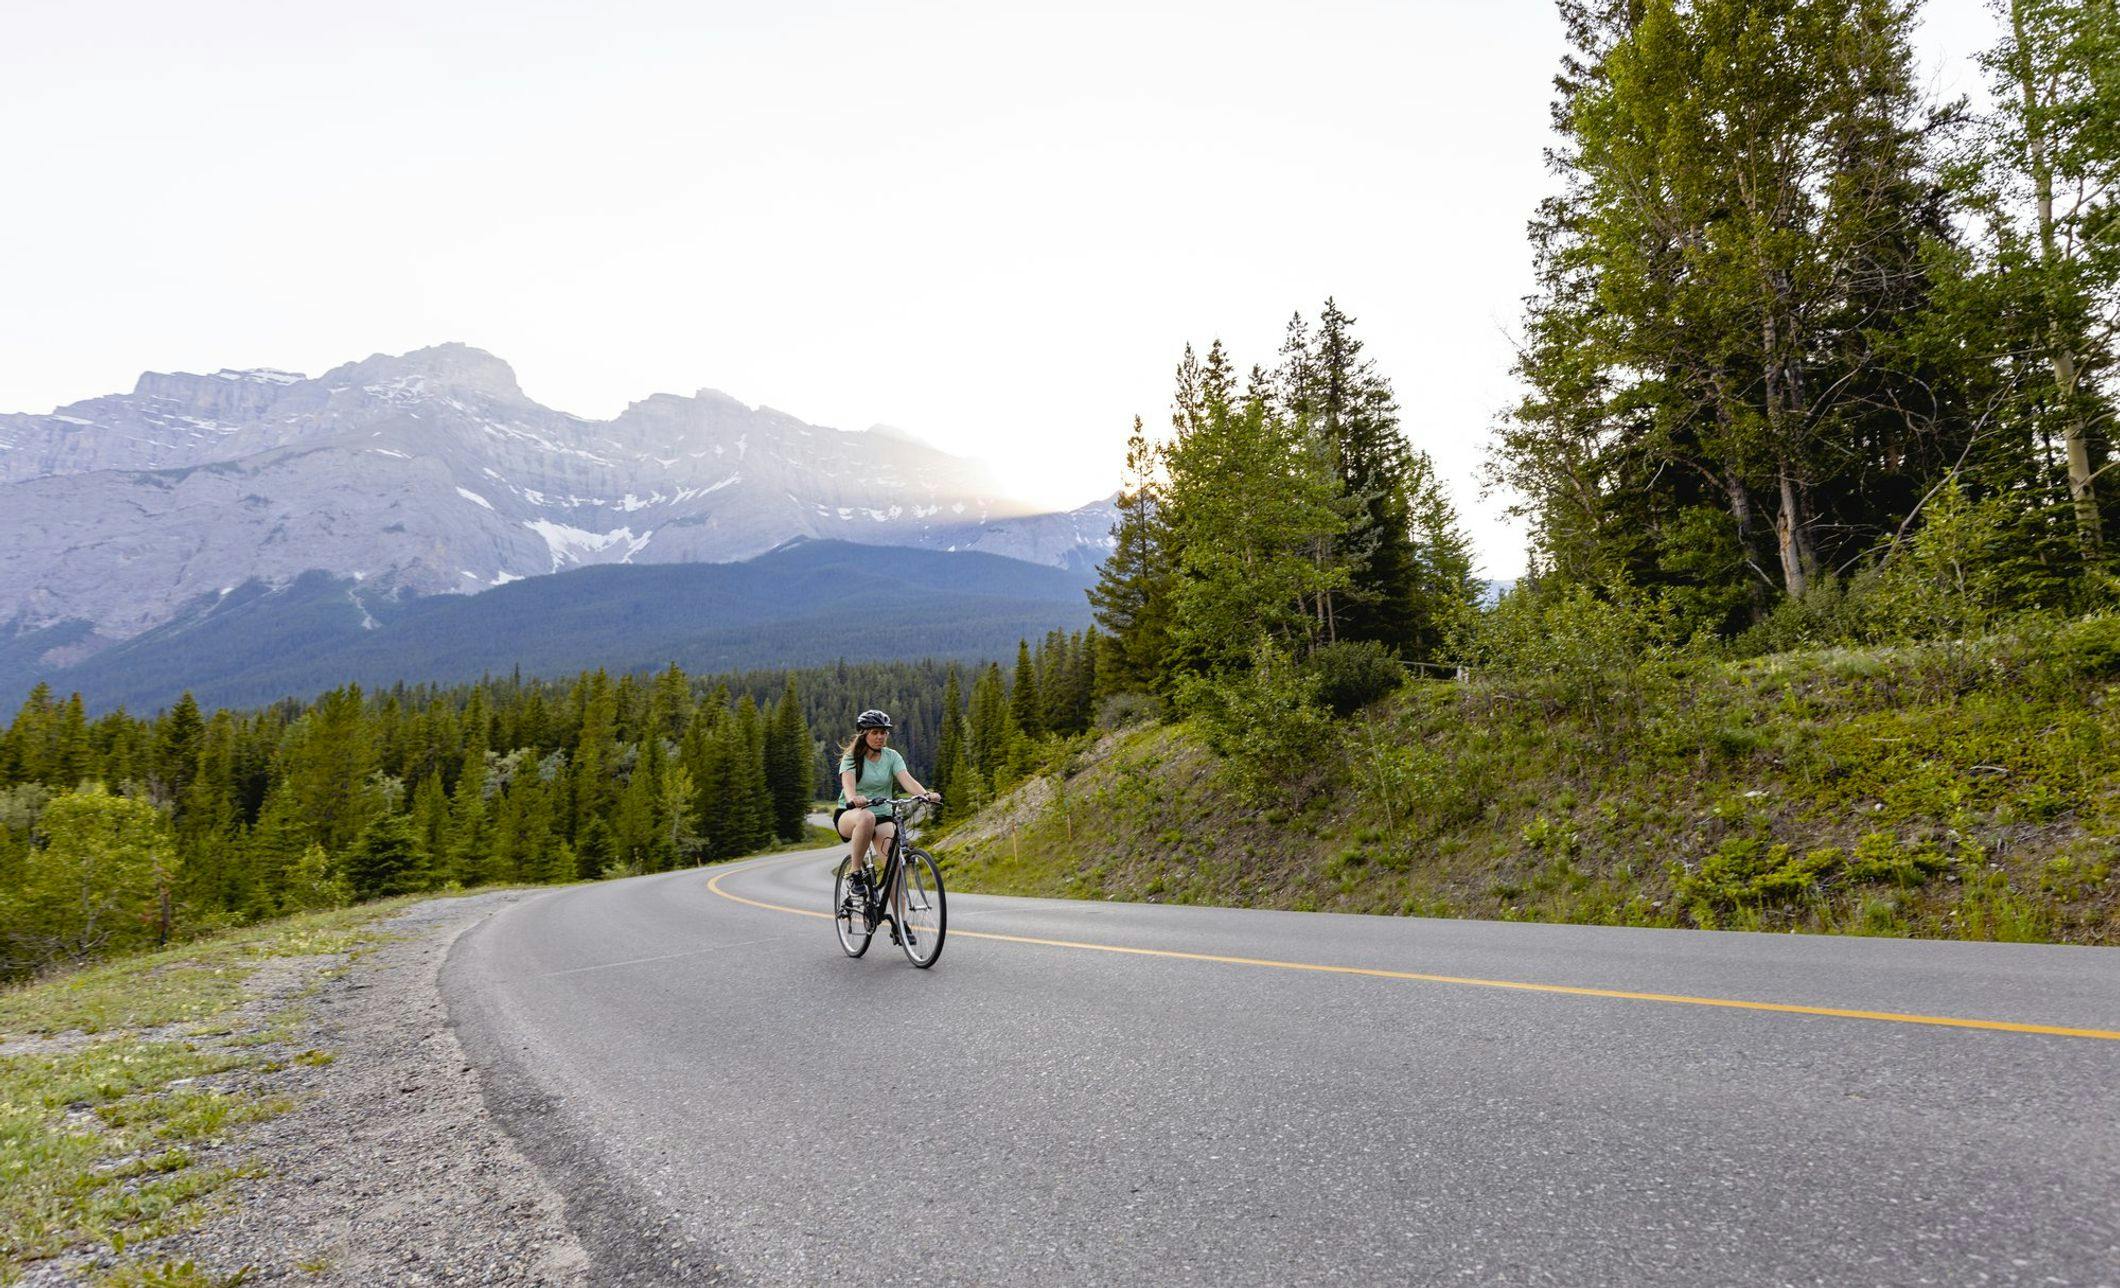 A female rides her bike along an empty stretch of winding road surrounded by mountains on a warm summer day